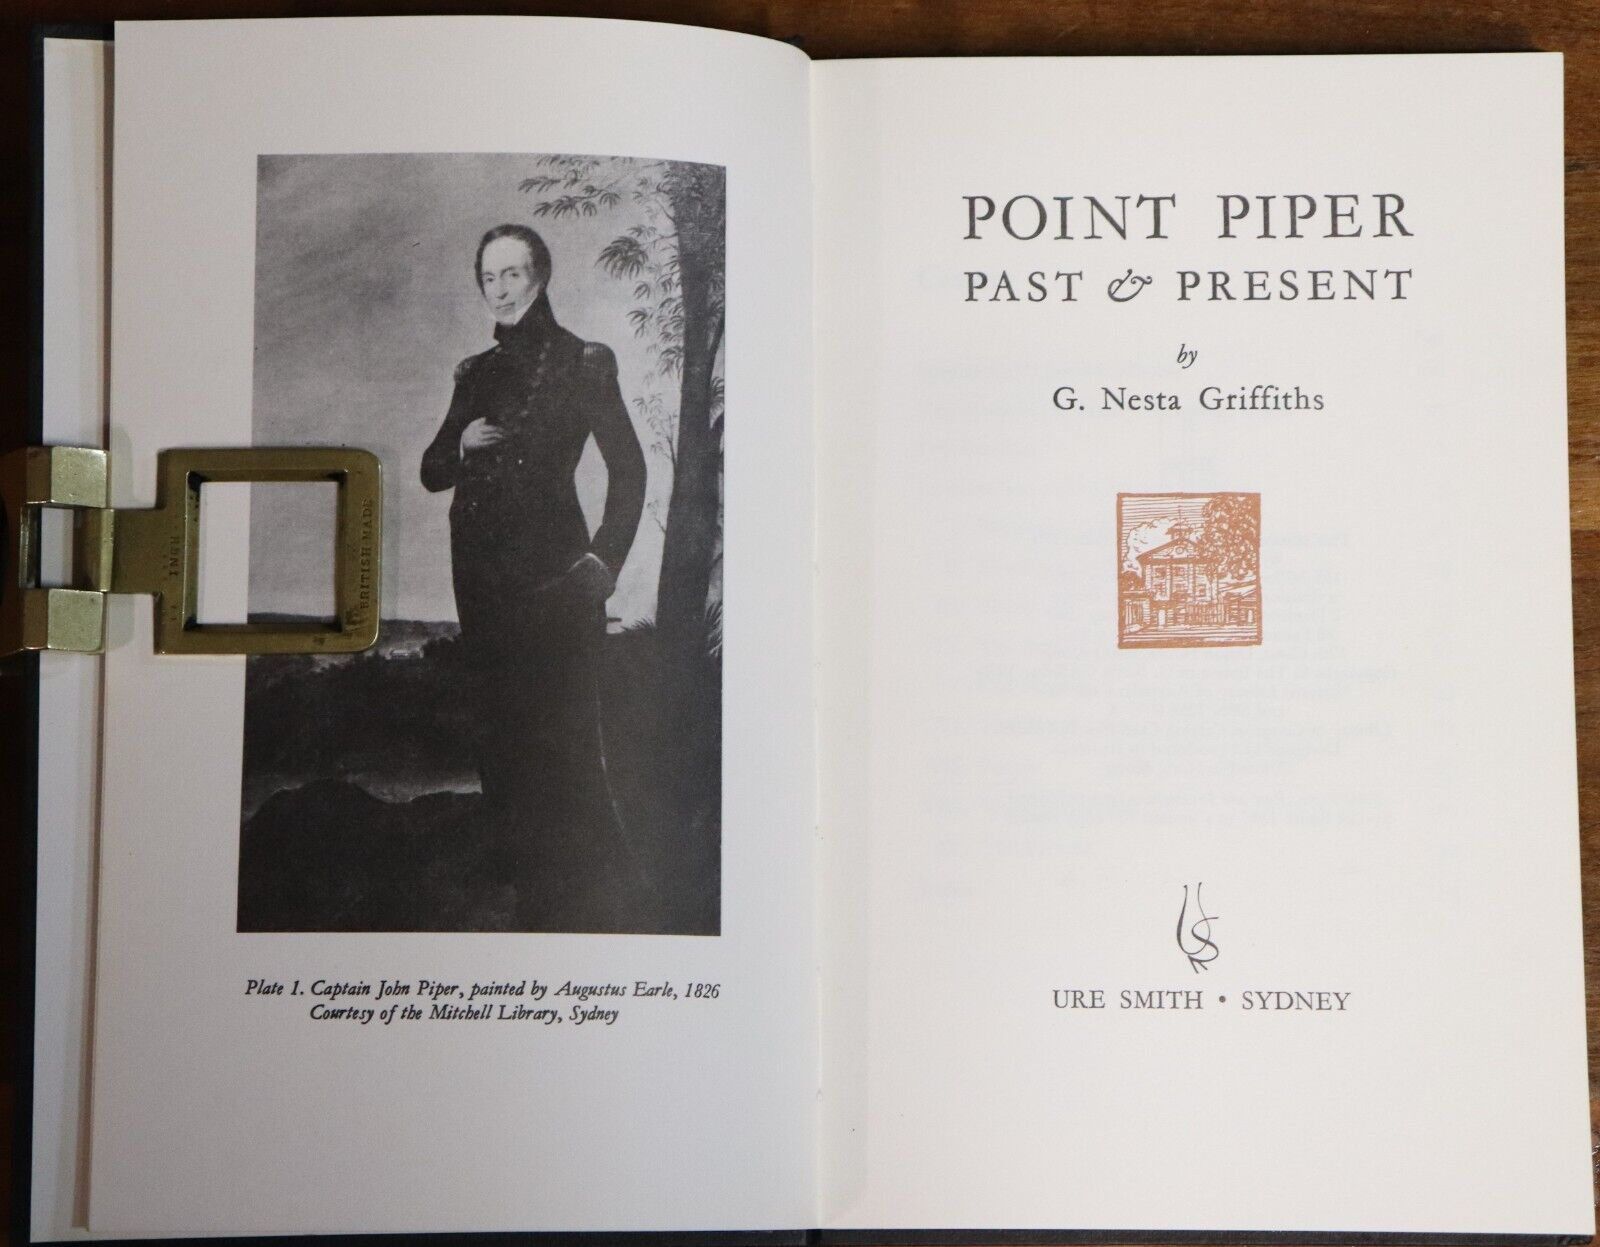 Point Piper Past & Present by G Nesta Griffiths - 1970 - Australian History Book - 0